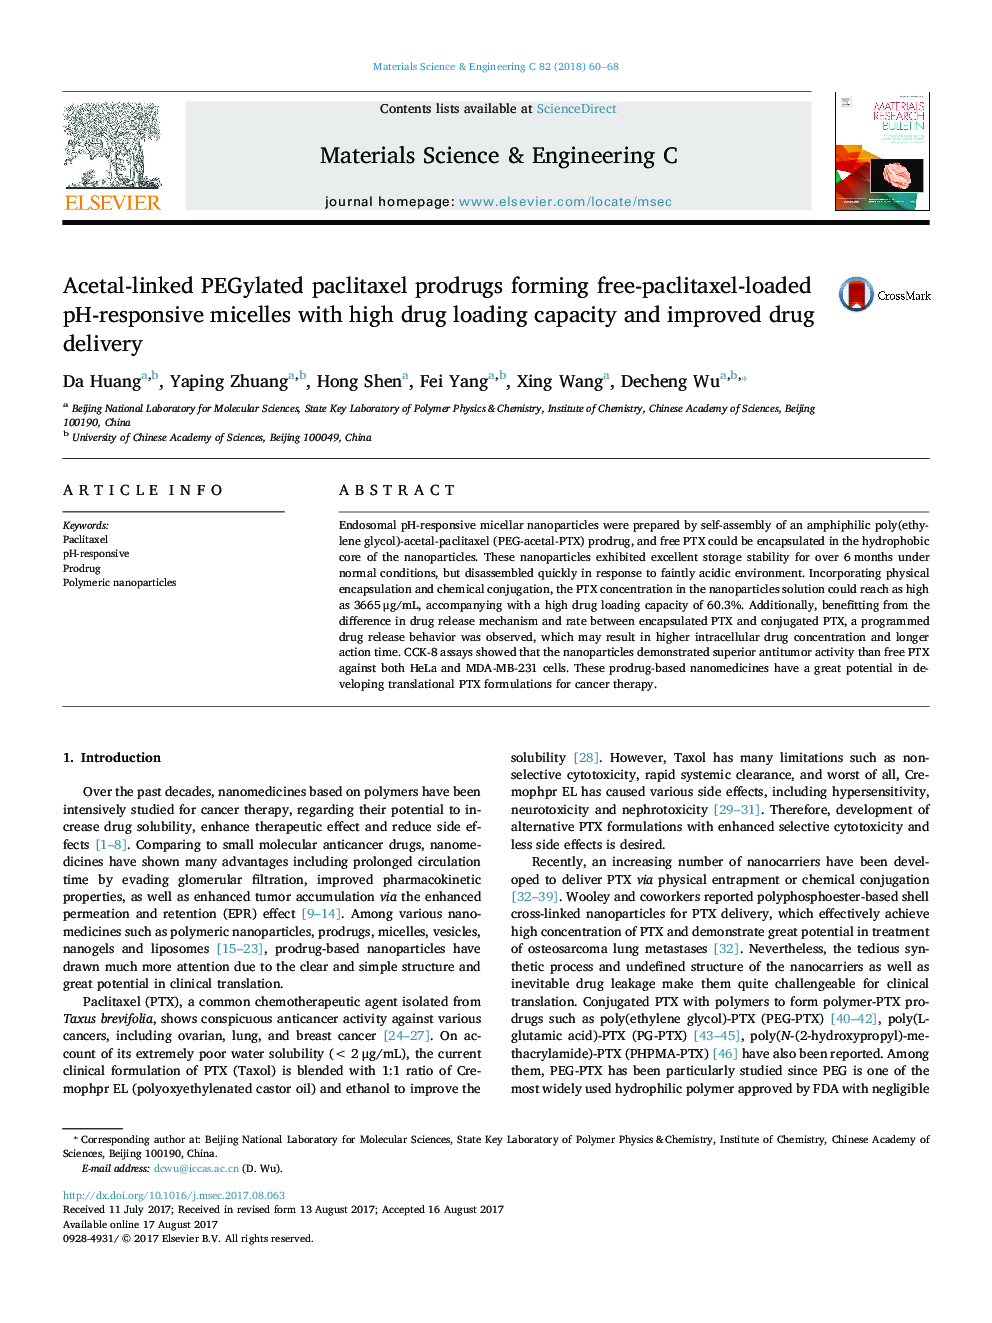 Acetal-linked PEGylated paclitaxel prodrugs forming free-paclitaxel-loaded pH-responsive micelles with high drug loading capacity and improved drug delivery